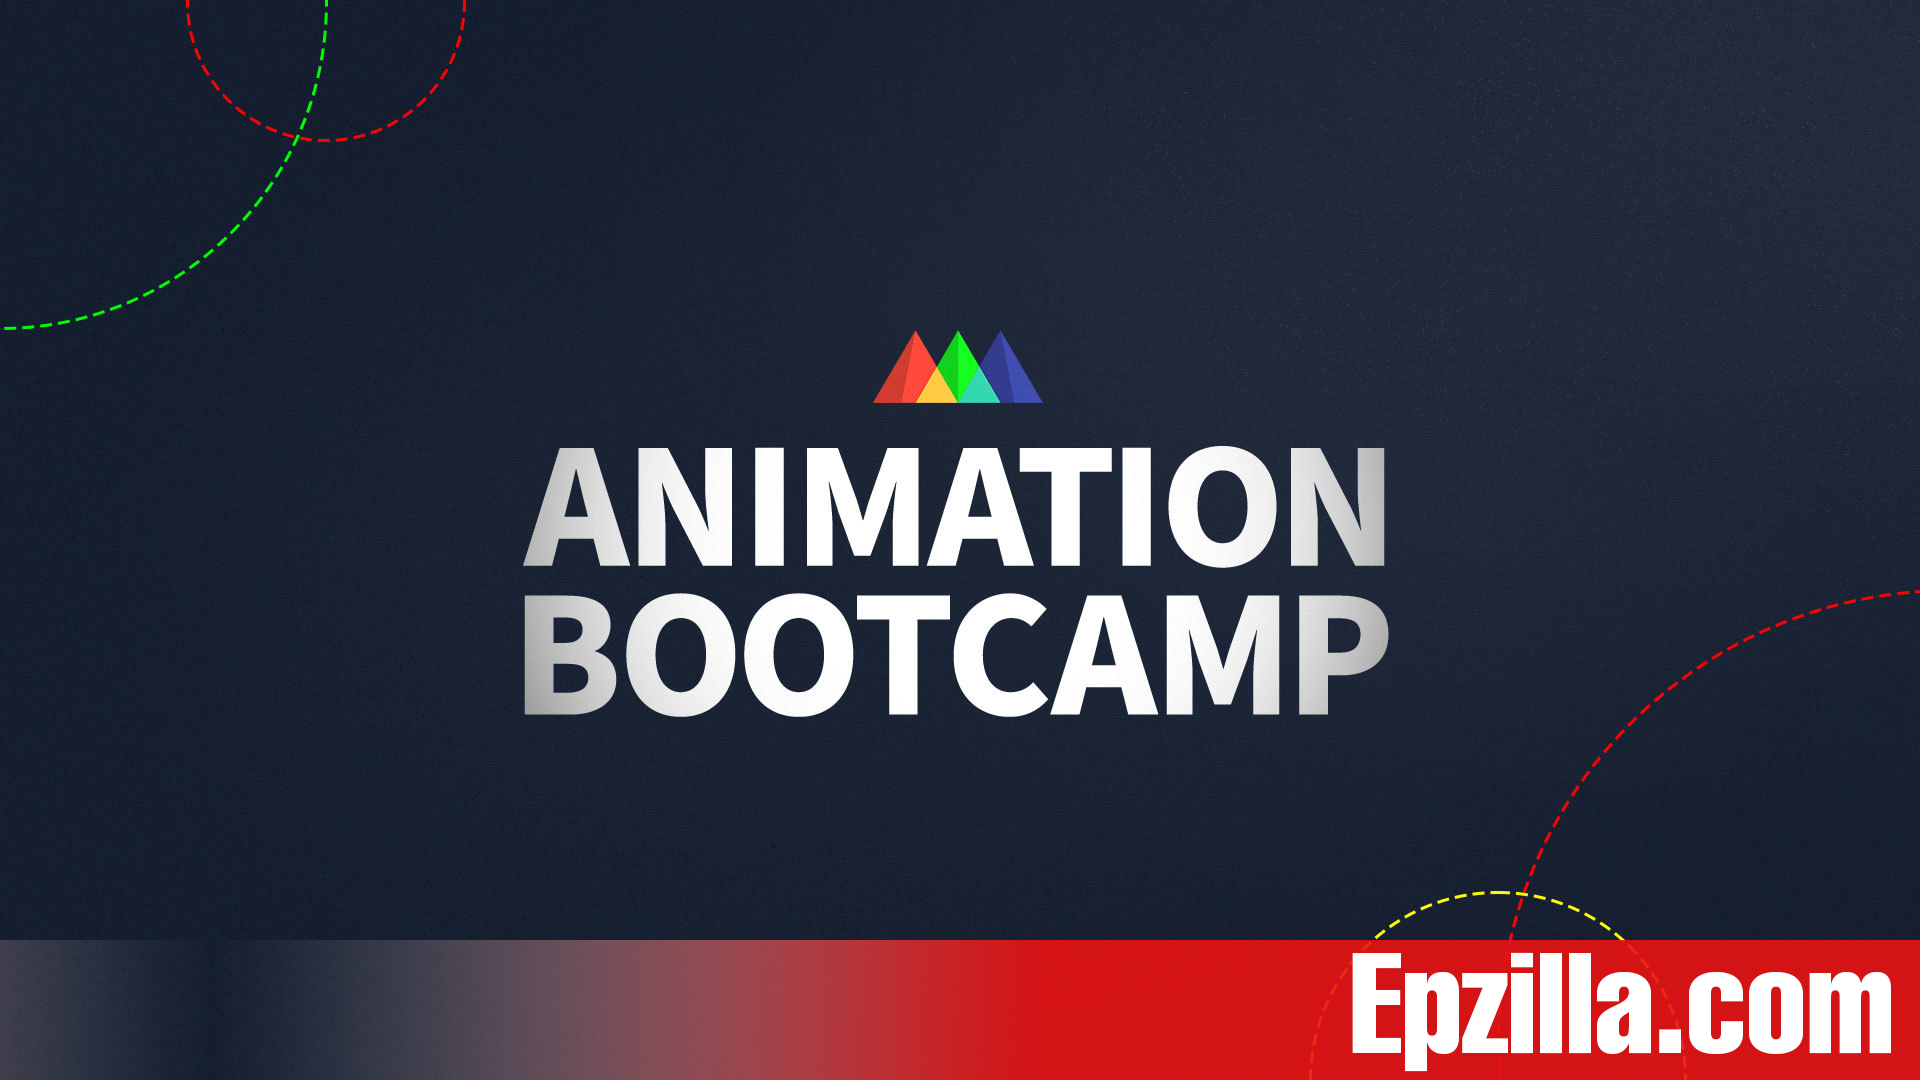 School-of-Motion-Animation-Bootcamp-Full-Course-Free-Download-Epzilla.com